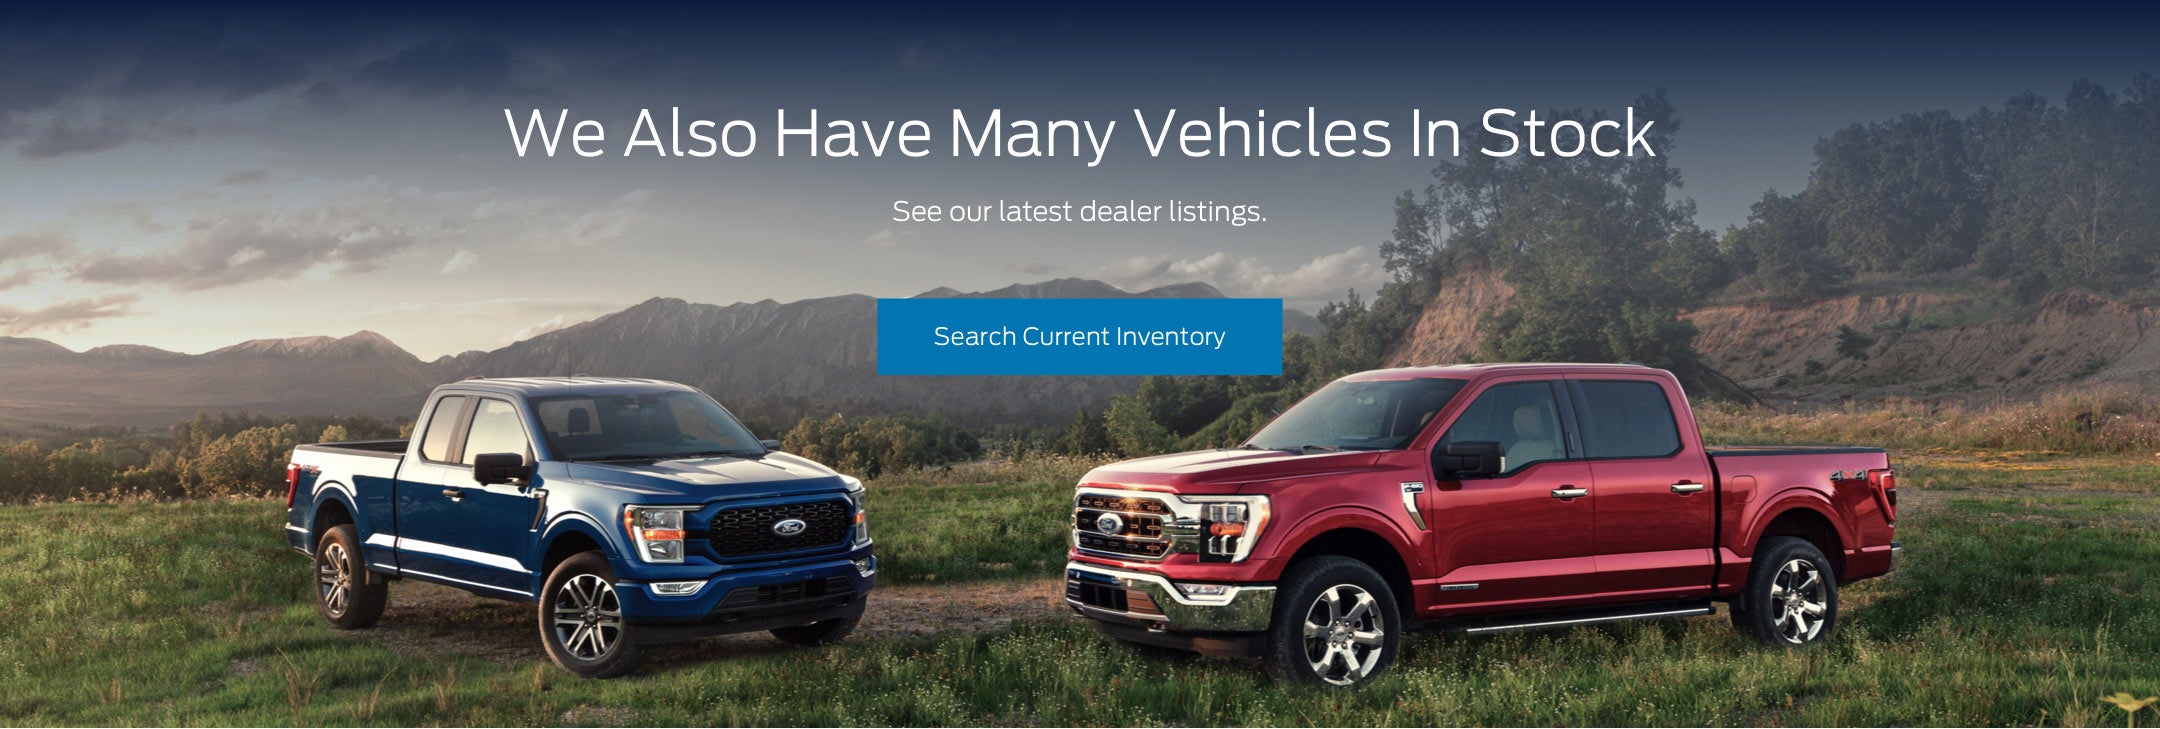 Ford vehicles in stock | Nielsen Ford of Morristown in Morristown NJ